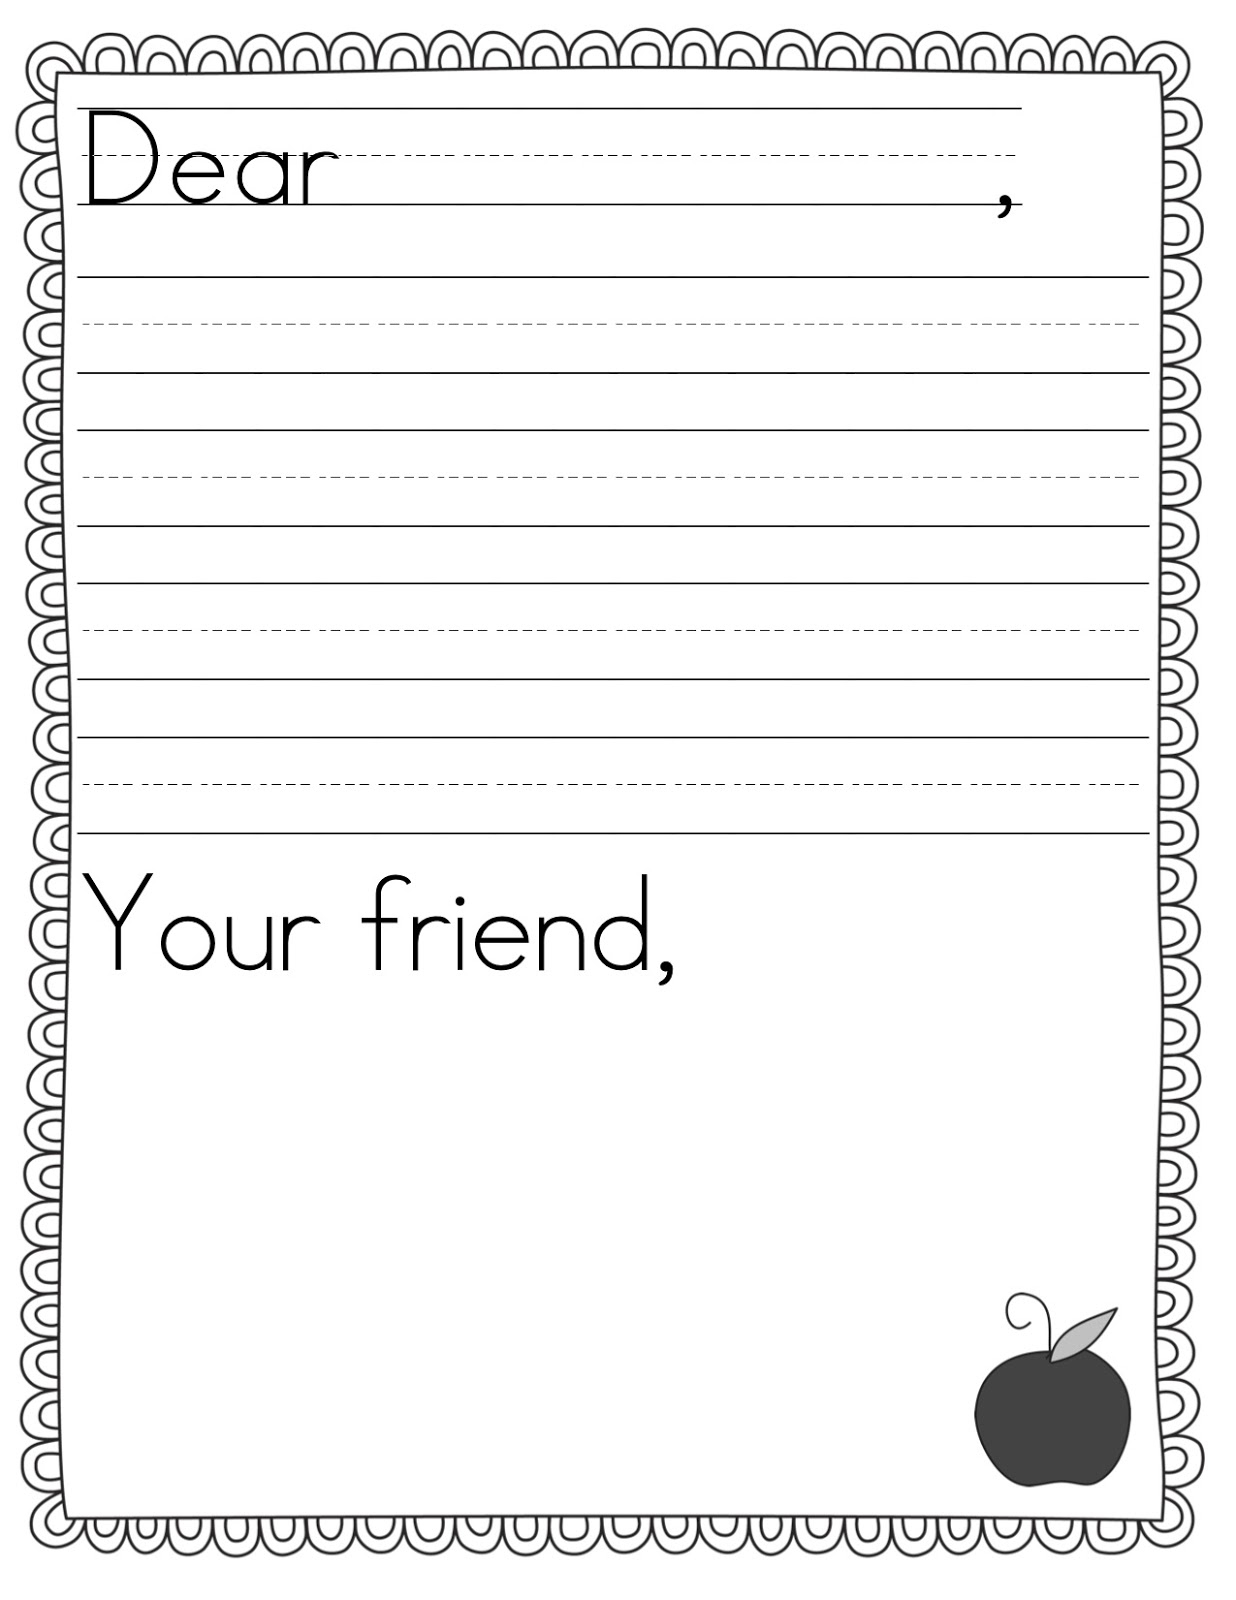 Kids Letter Writing Campaign — Urban Homestead Foundation Inside Blank Letter Writing Template For Kids